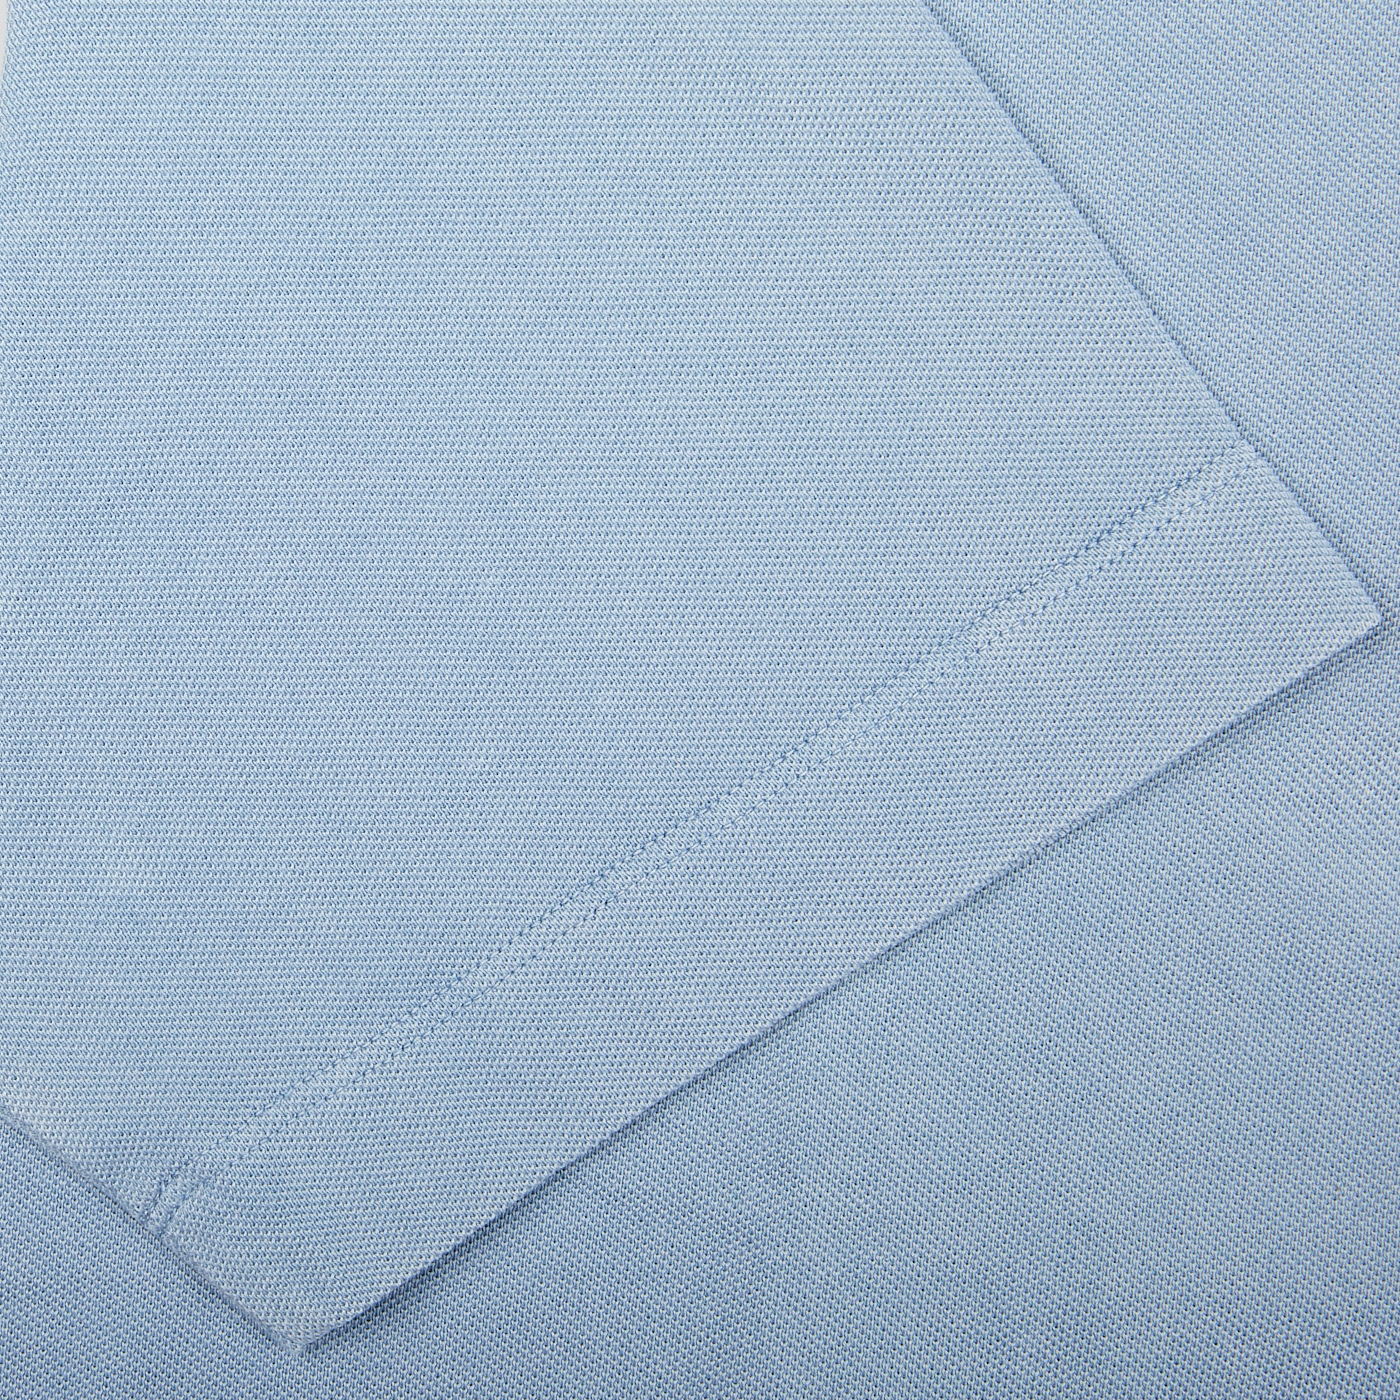 Close-up of a sky blue Drumohr cotton piquet polo shirt texture with a stitched seam, made in Italy.